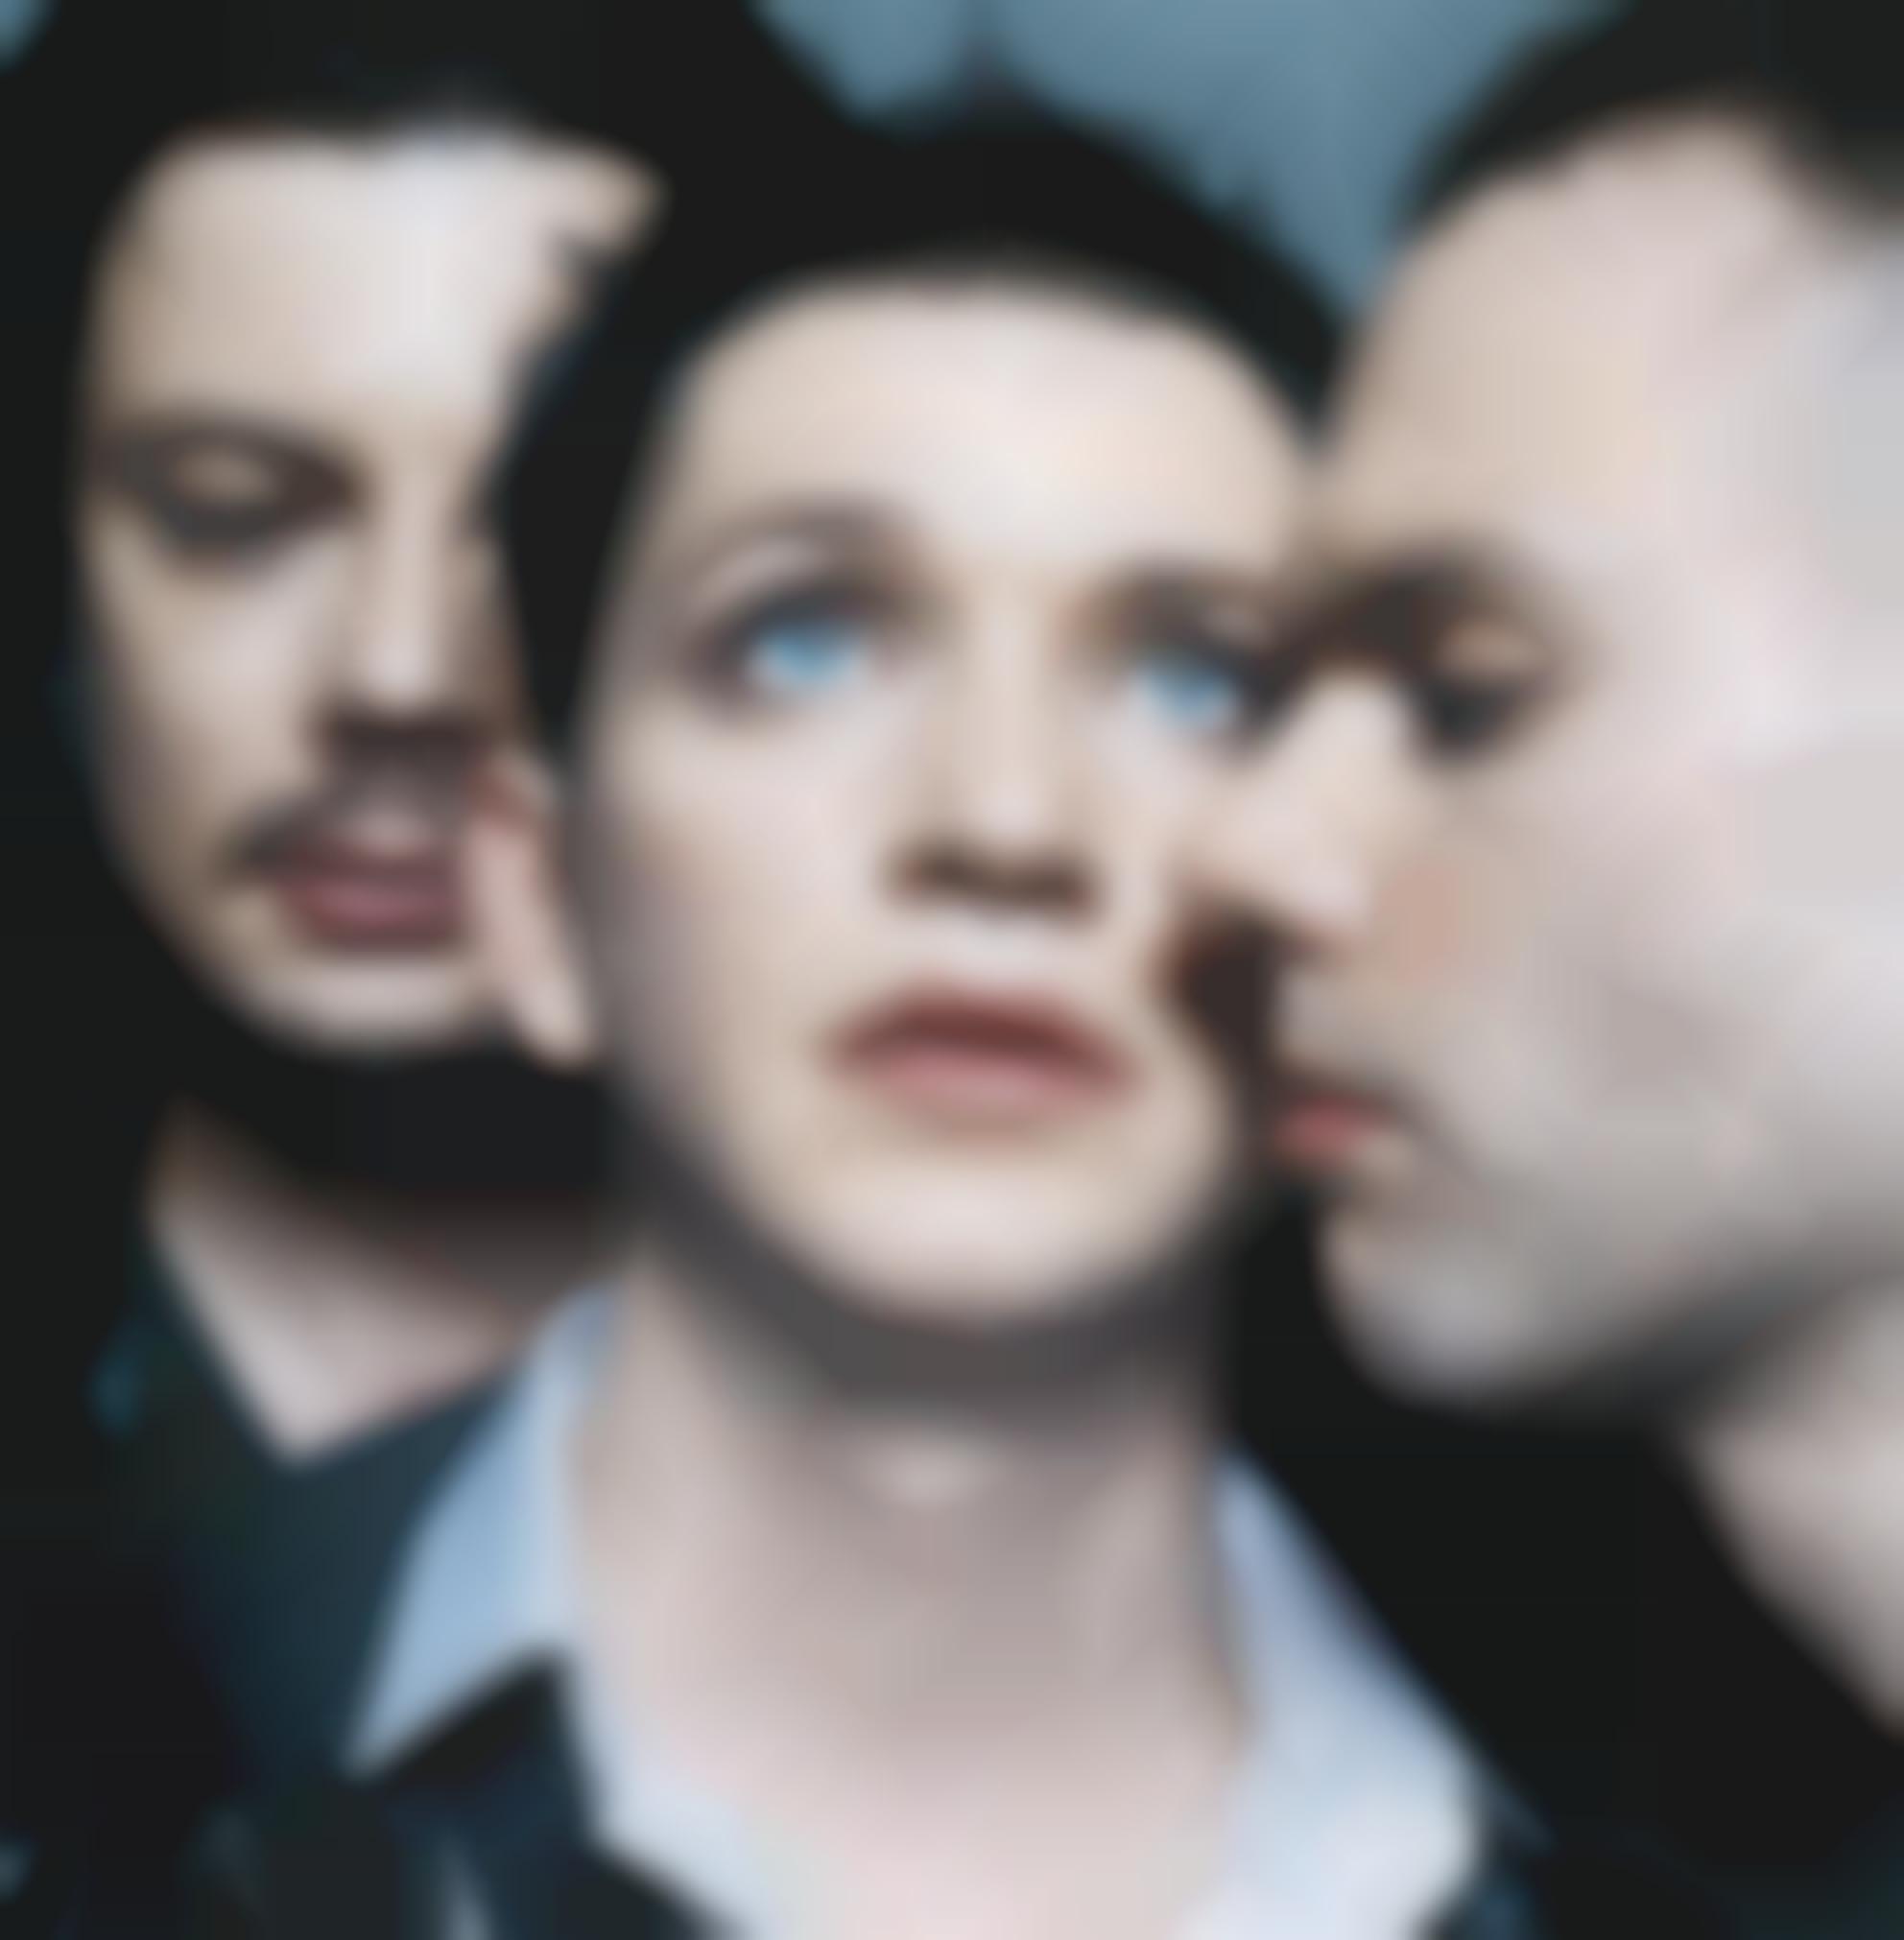 video placebo